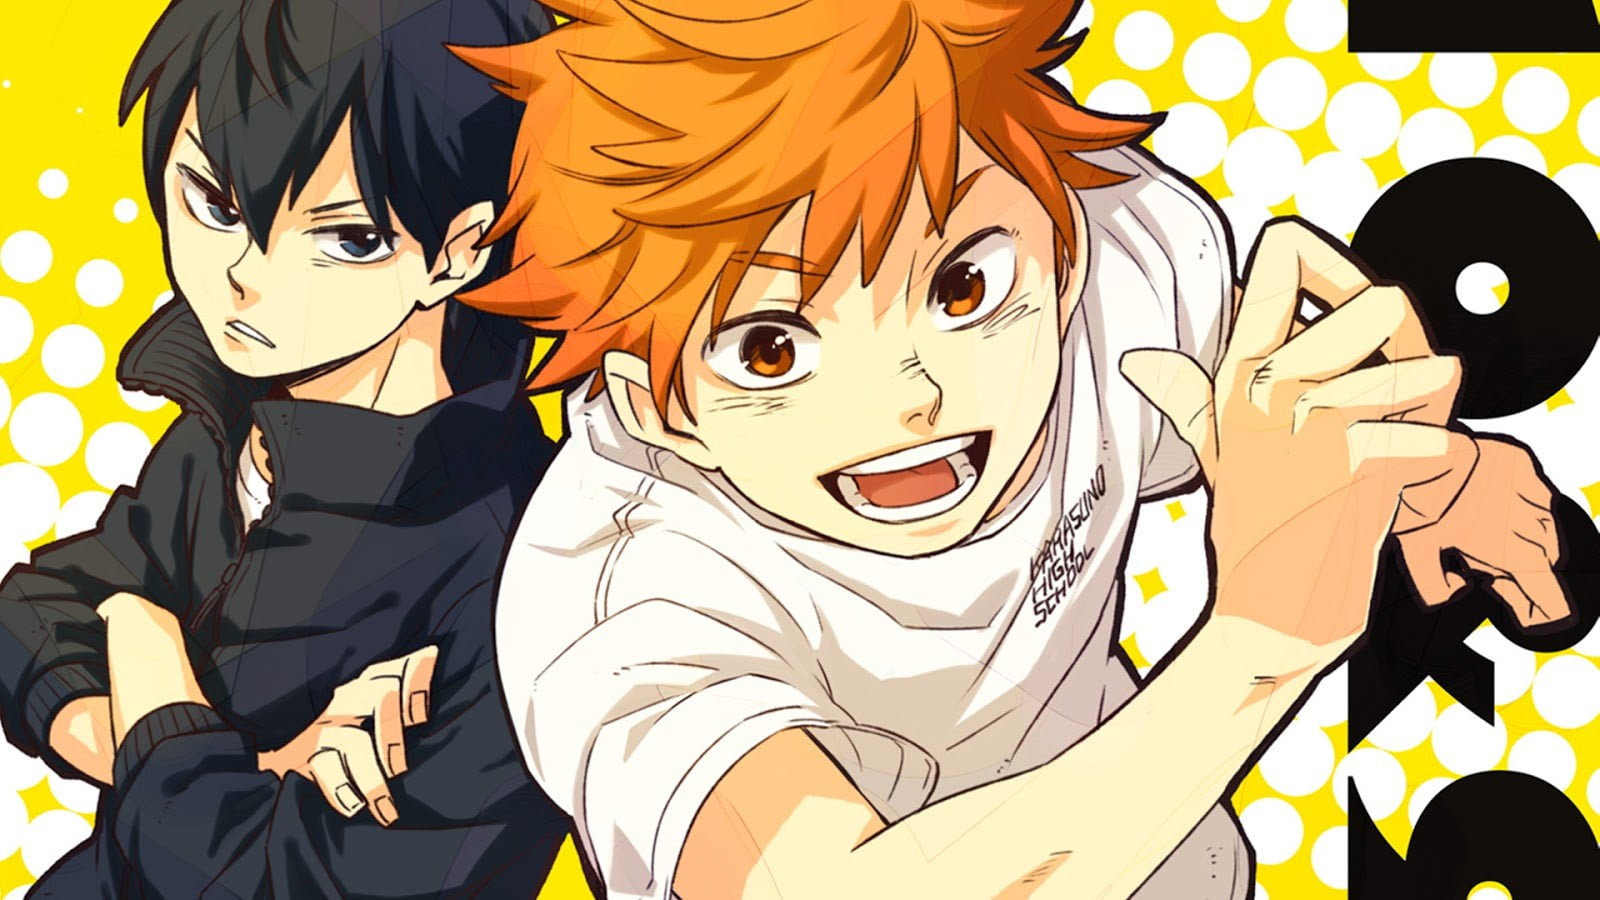 Haikyuu Chapter 383 Release Date, Plot Spoilers Hinata vs Kageyama Match is going to be Epic